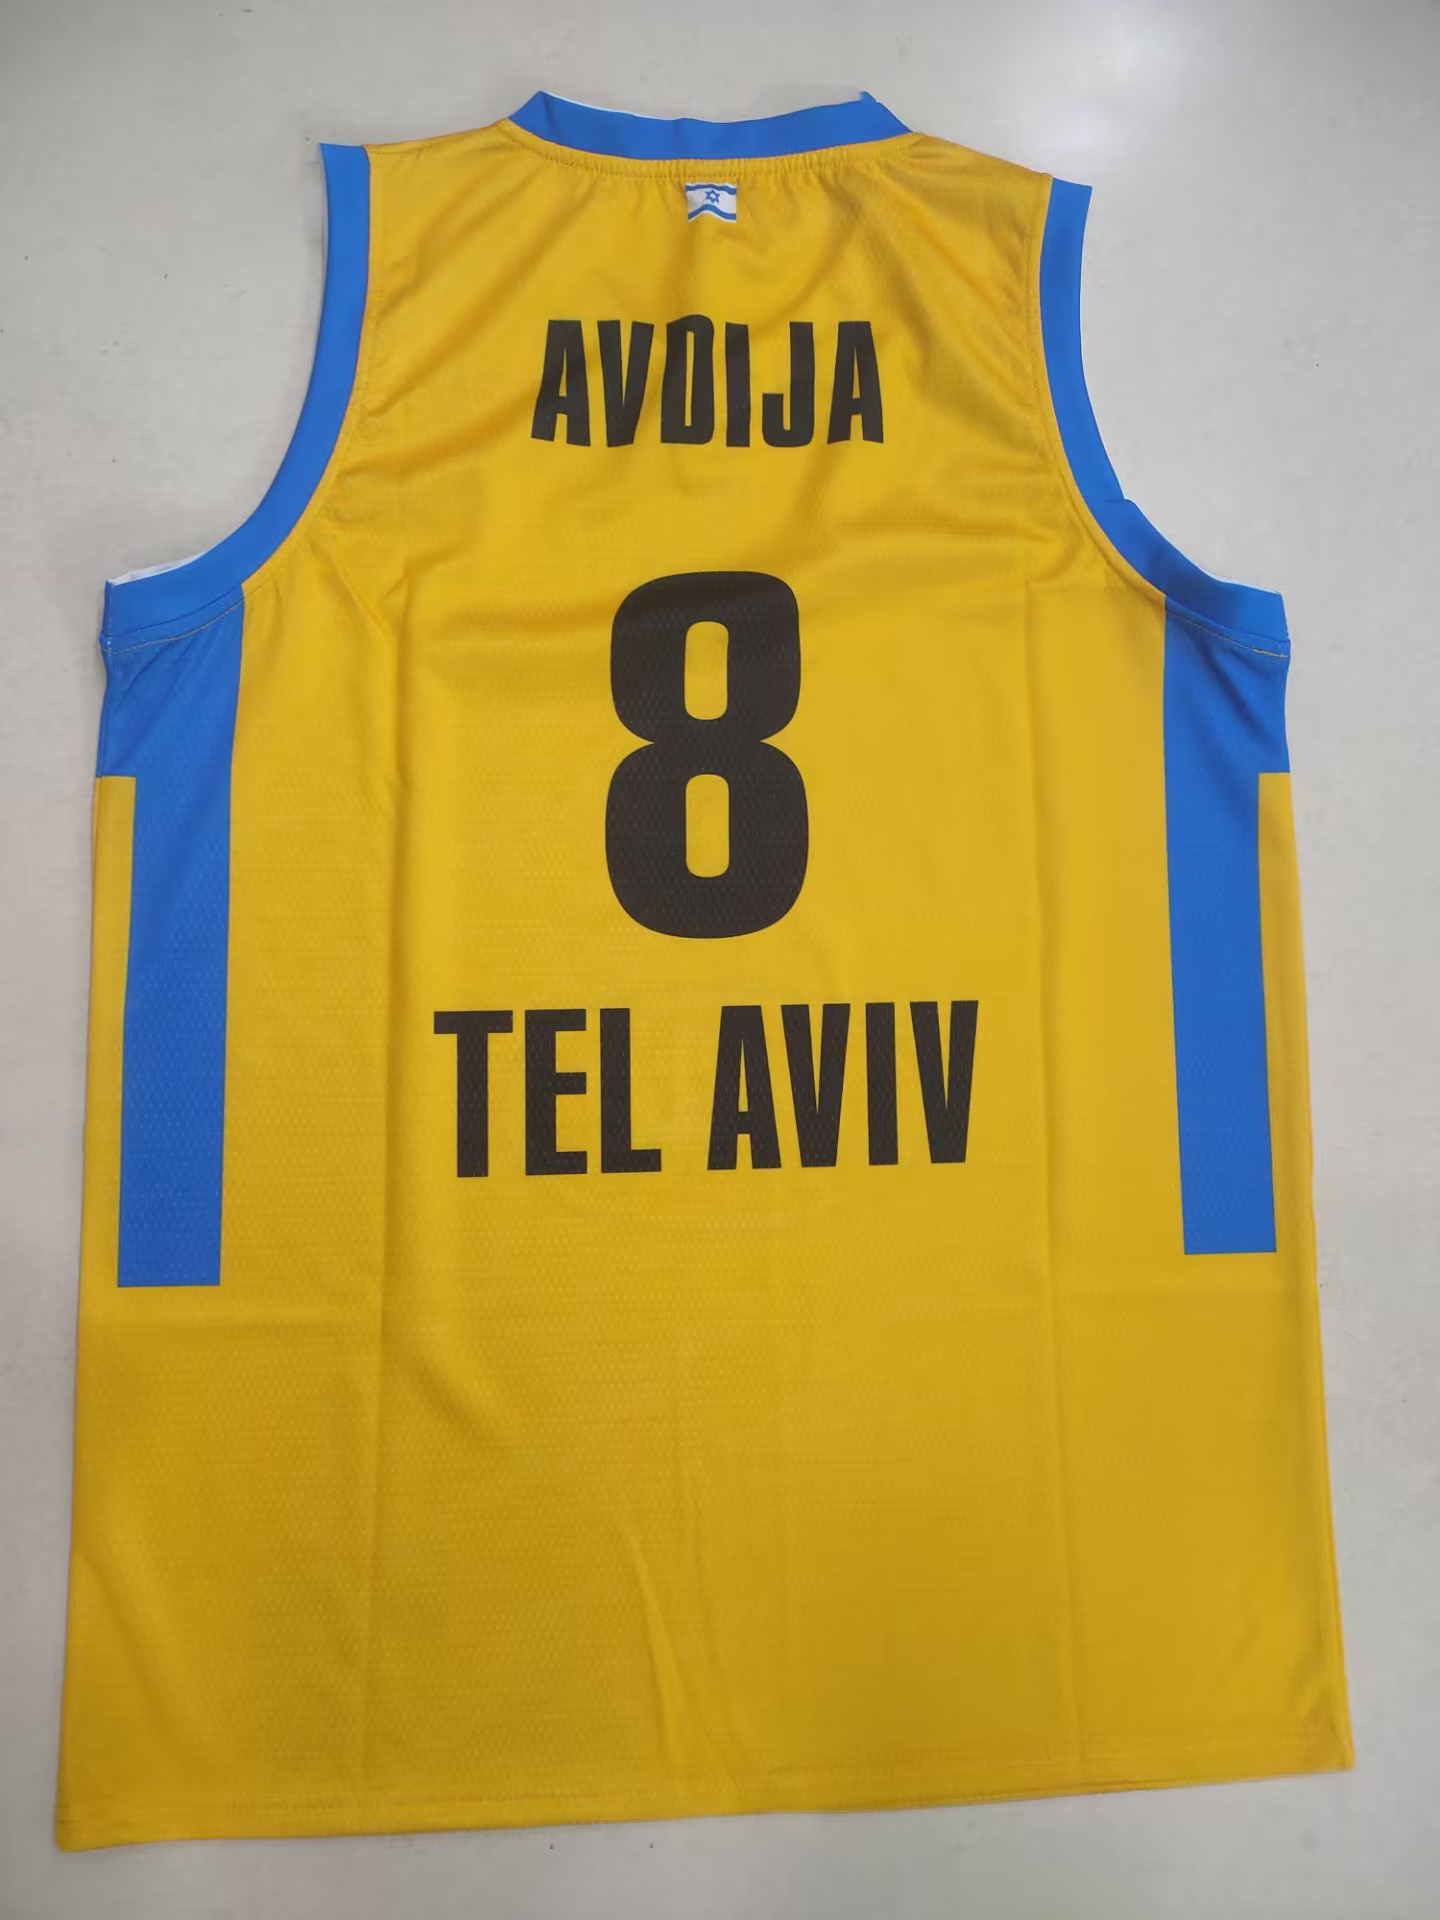 Maccabi Tel Aviv jasikevicius 2005-06 maillot de basket-ball adult basketball jersey can be customized with any name and number